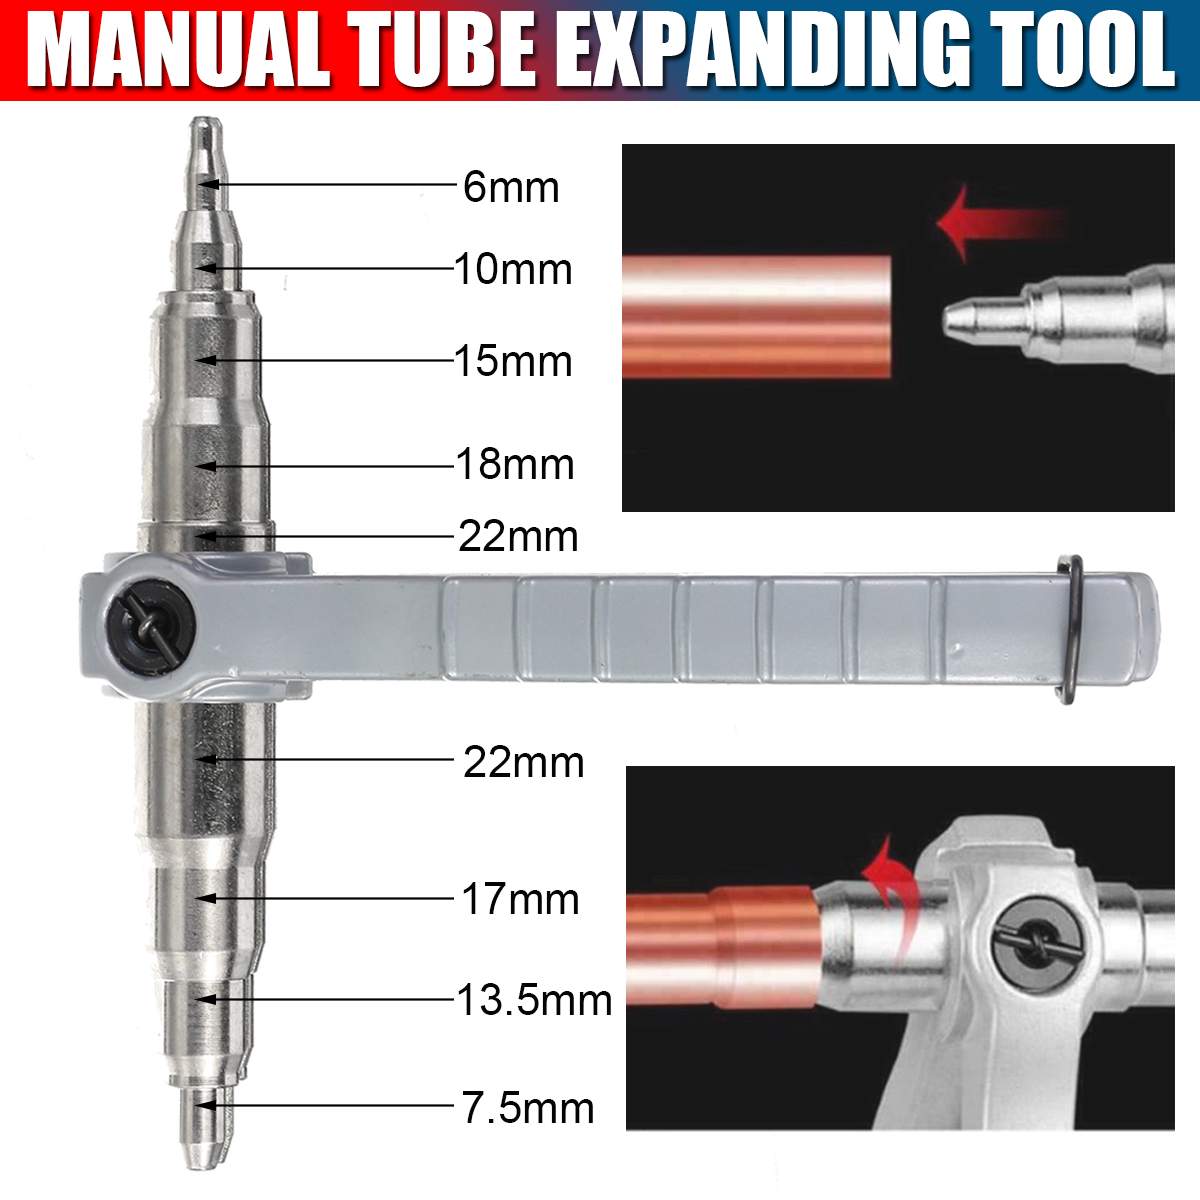 Pipe Tube Expander Hand Refrigeration Tool Air Conditioner Install Repair